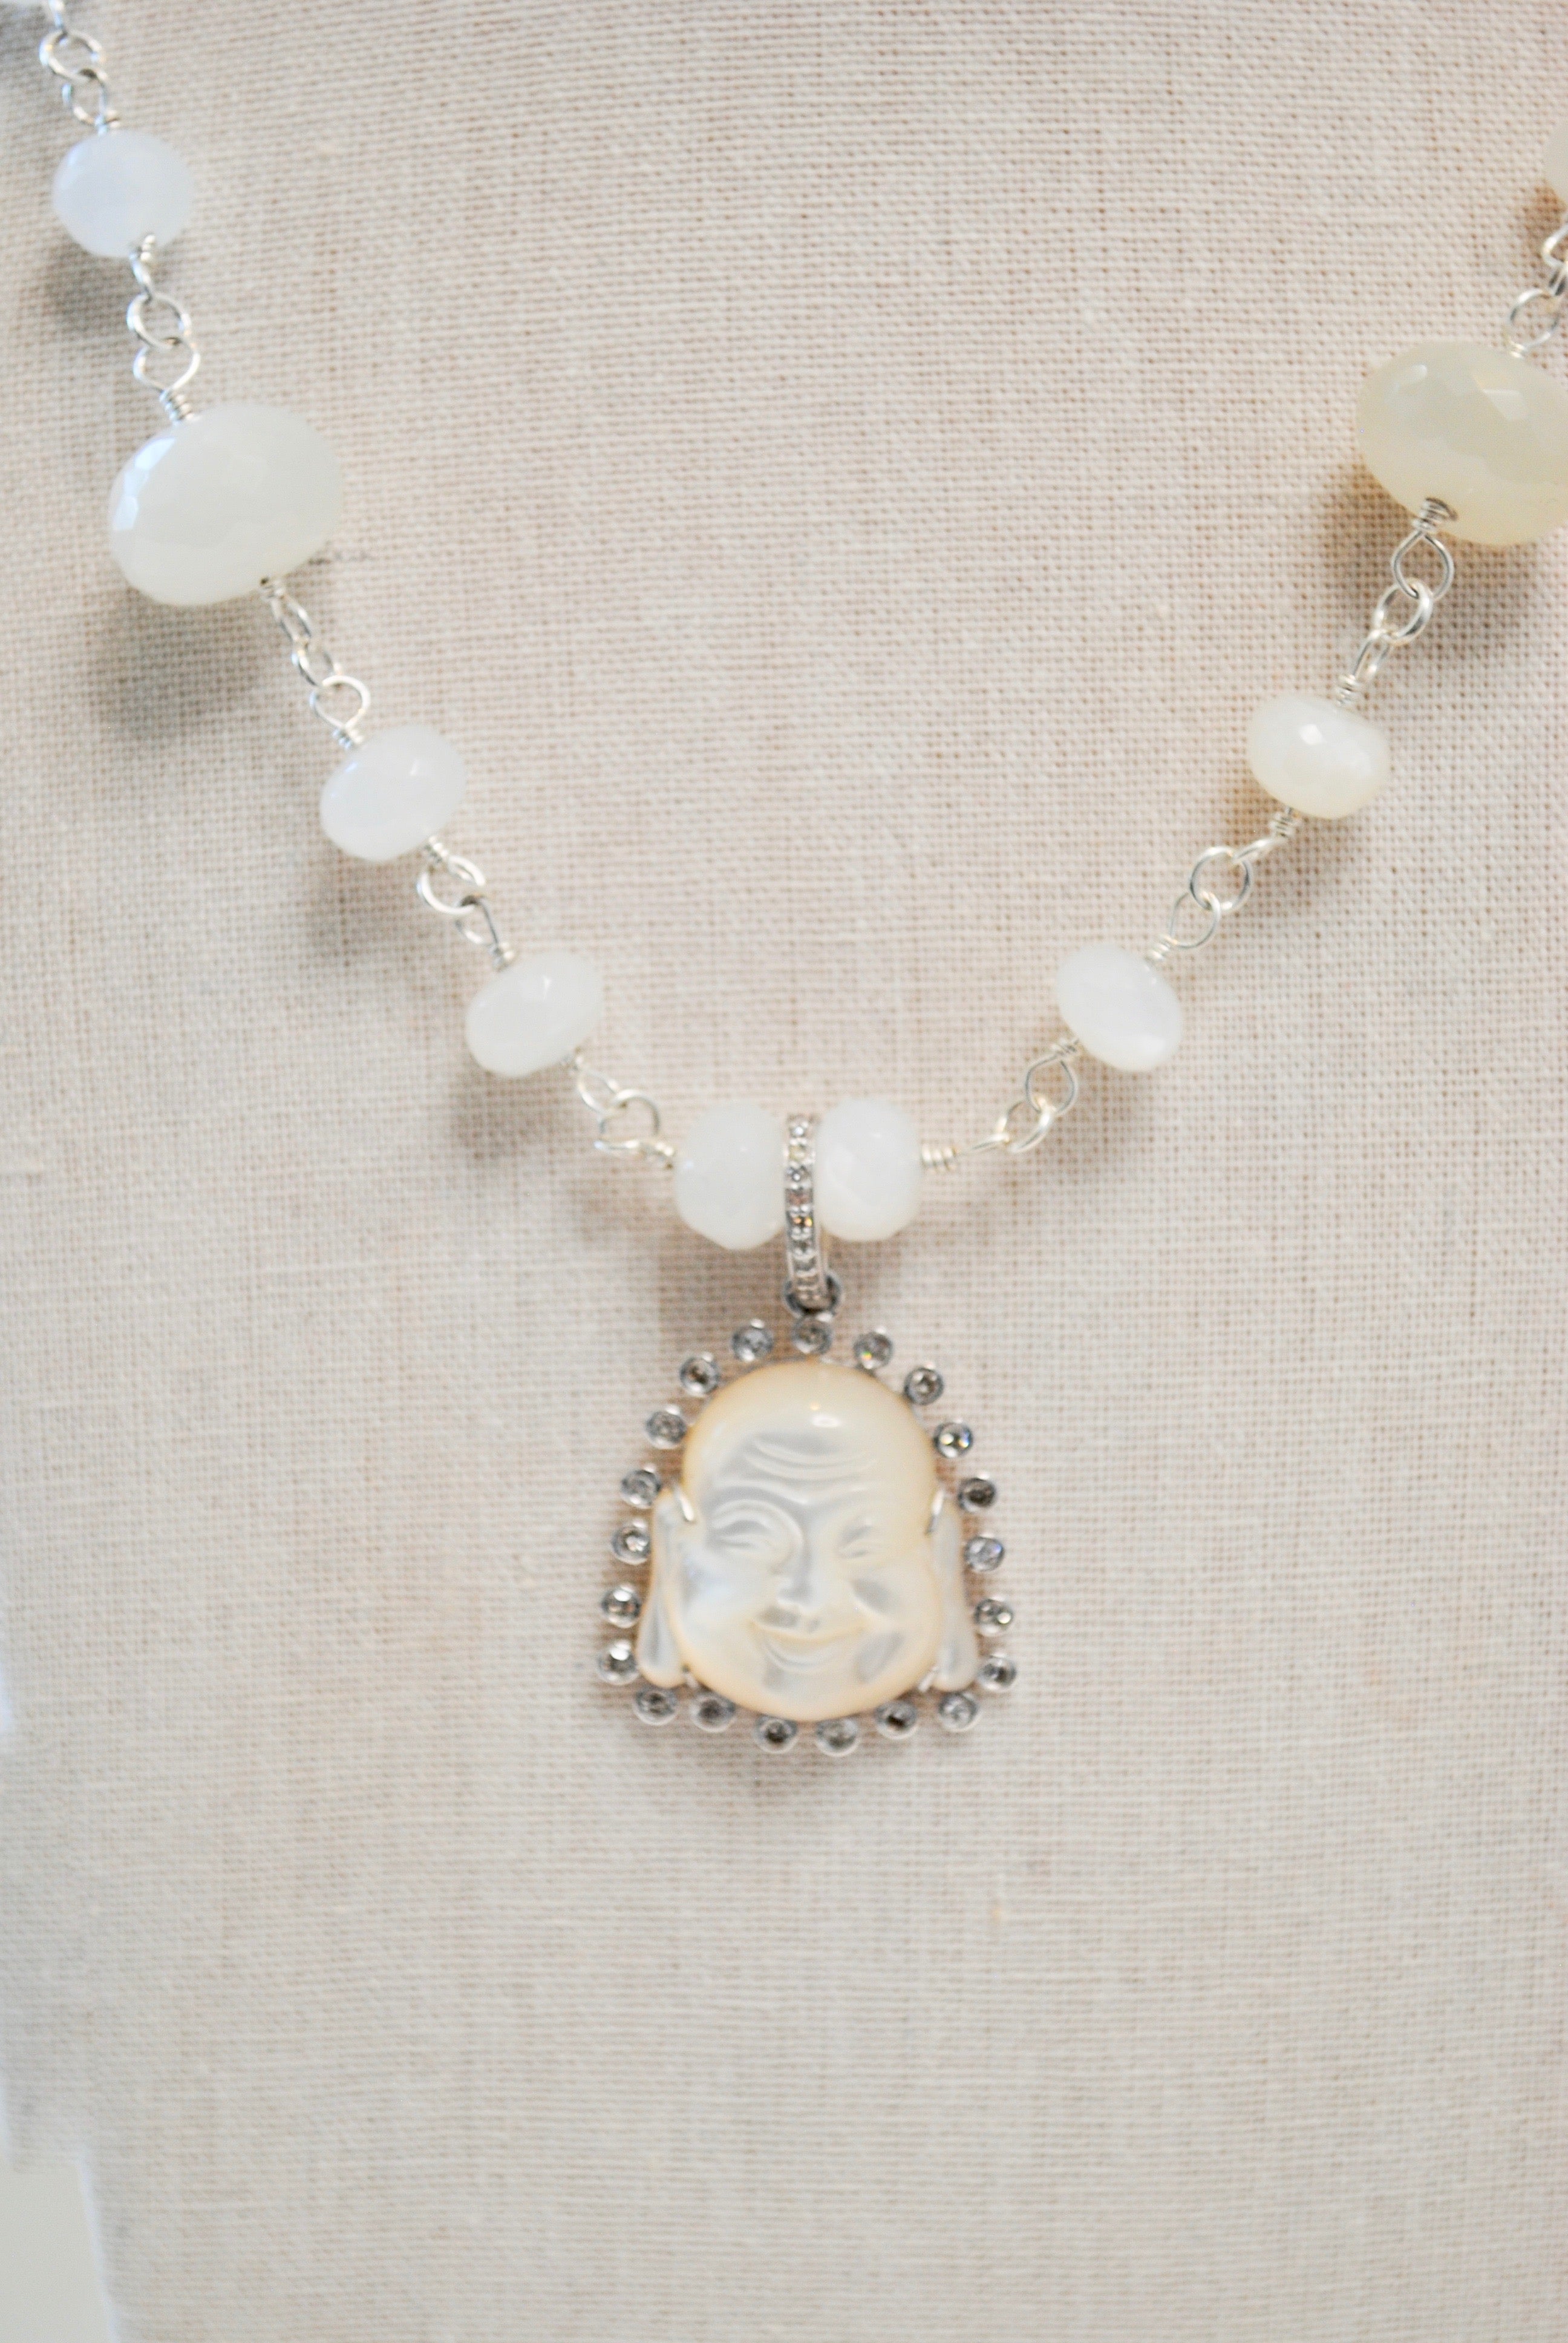 Carved Mother of Pearl Buddha Pendant Necklace